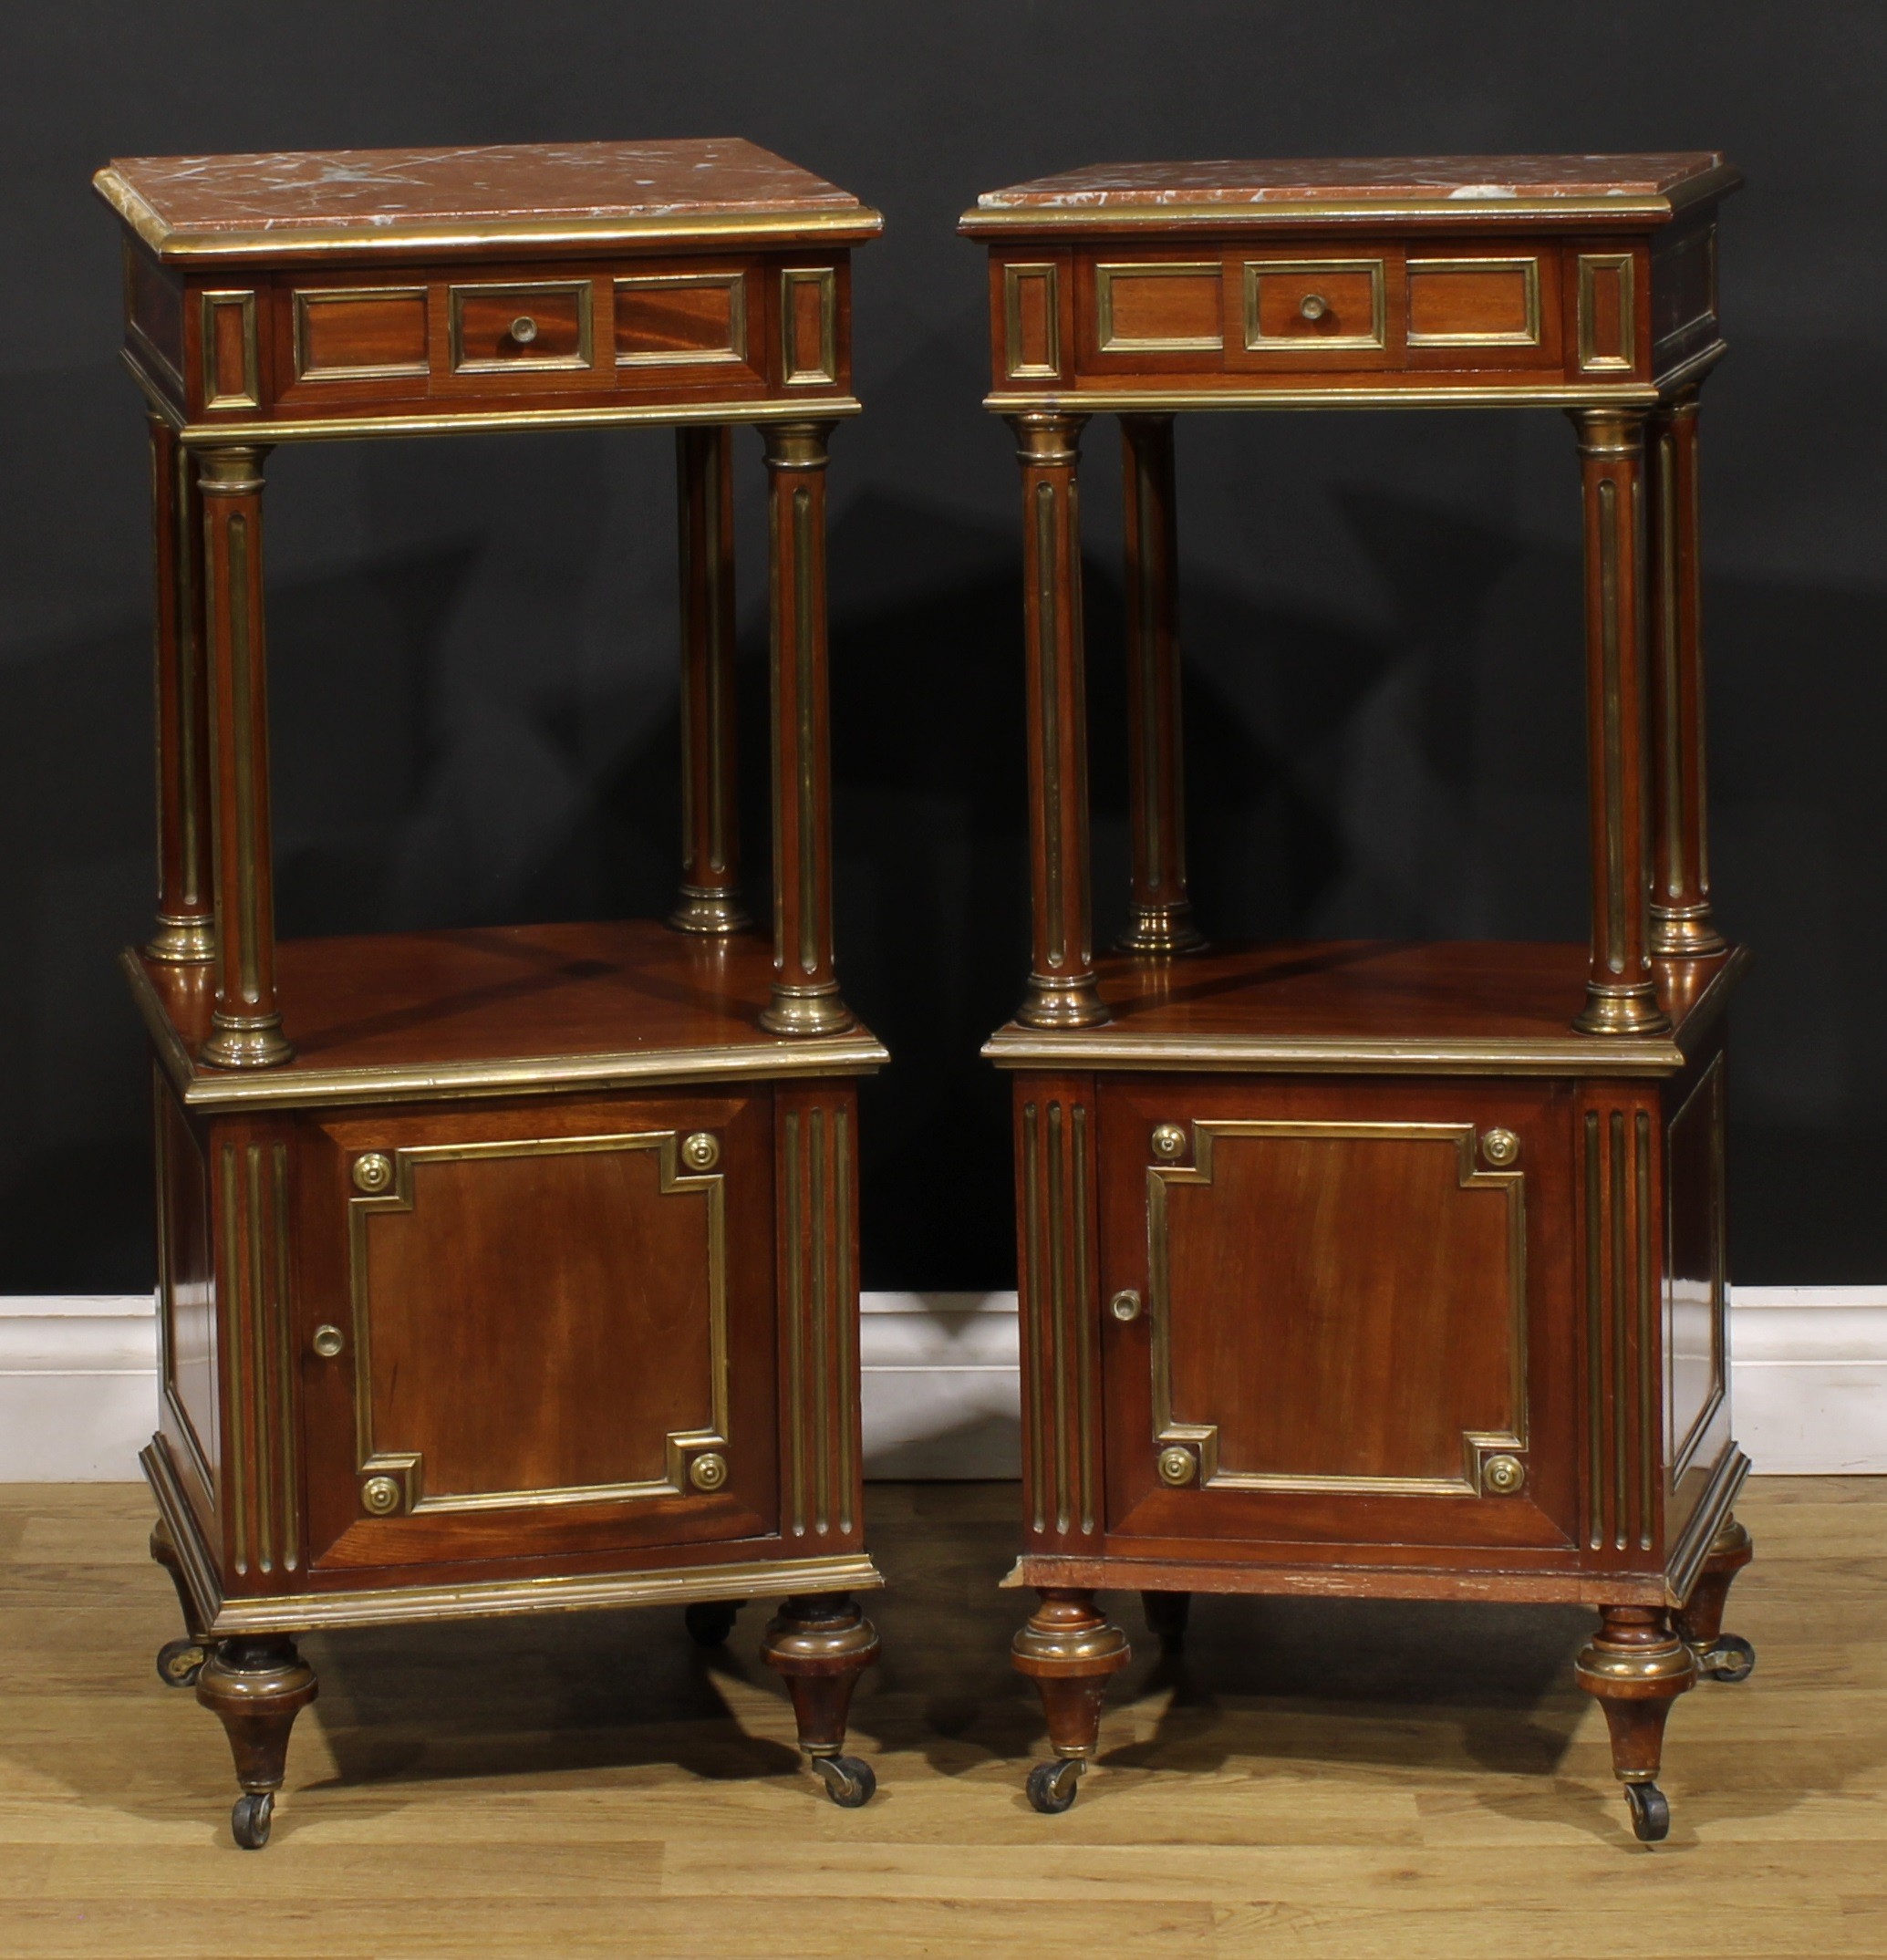 A pair of French Empire design Third Republic period brass mounted and parcel-gilt mahogany tables